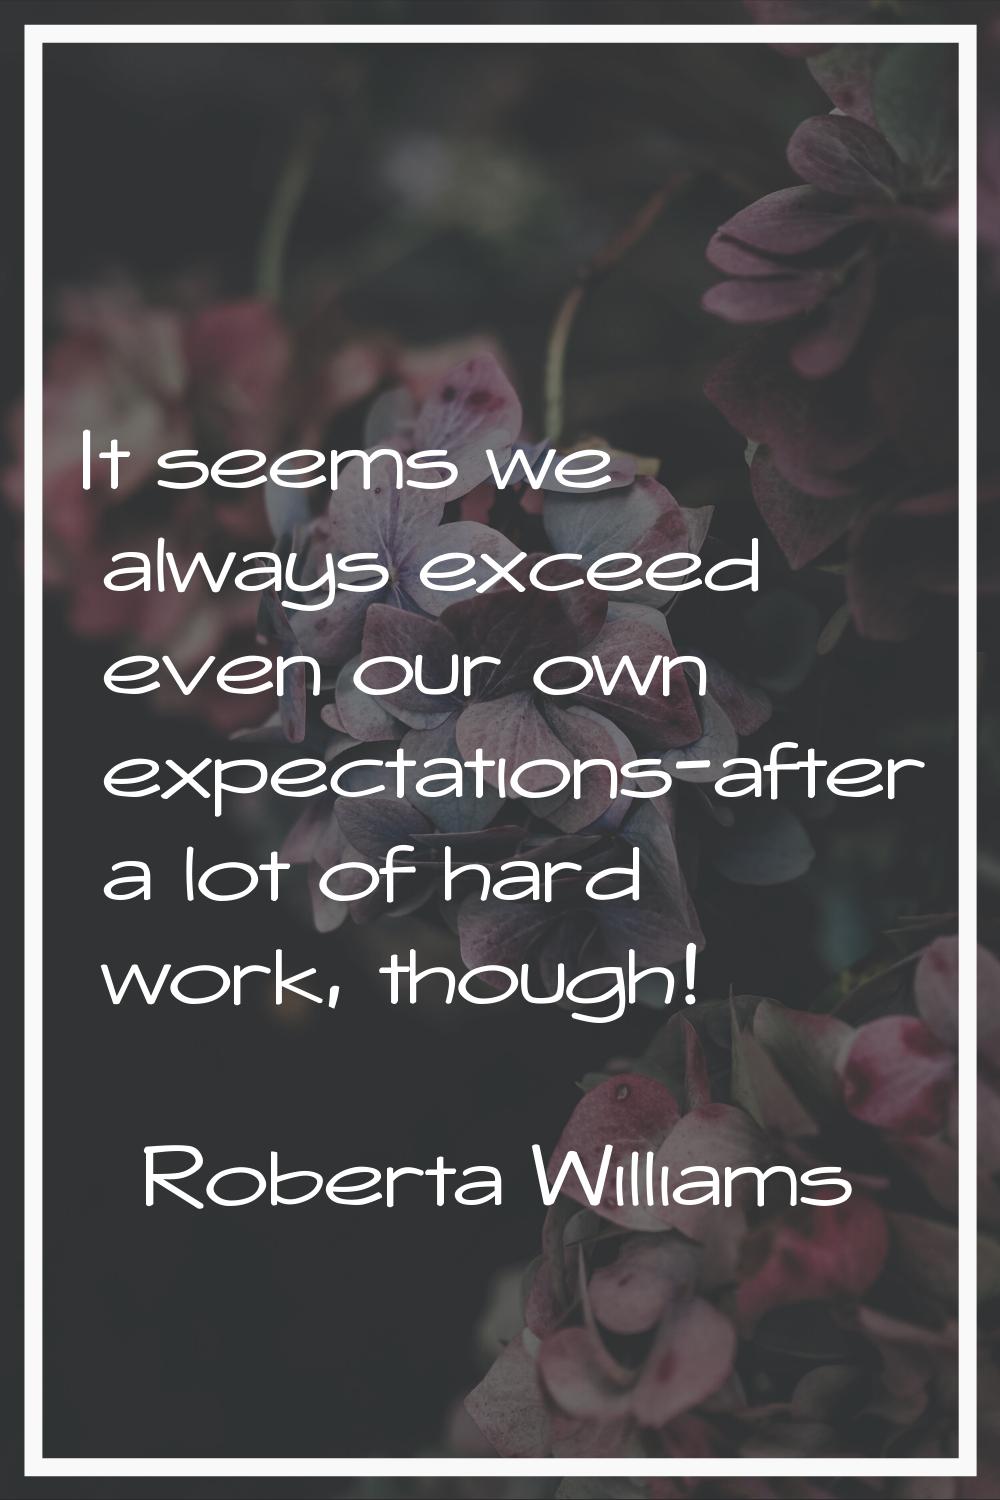 It seems we always exceed even our own expectations-after a lot of hard work, though!